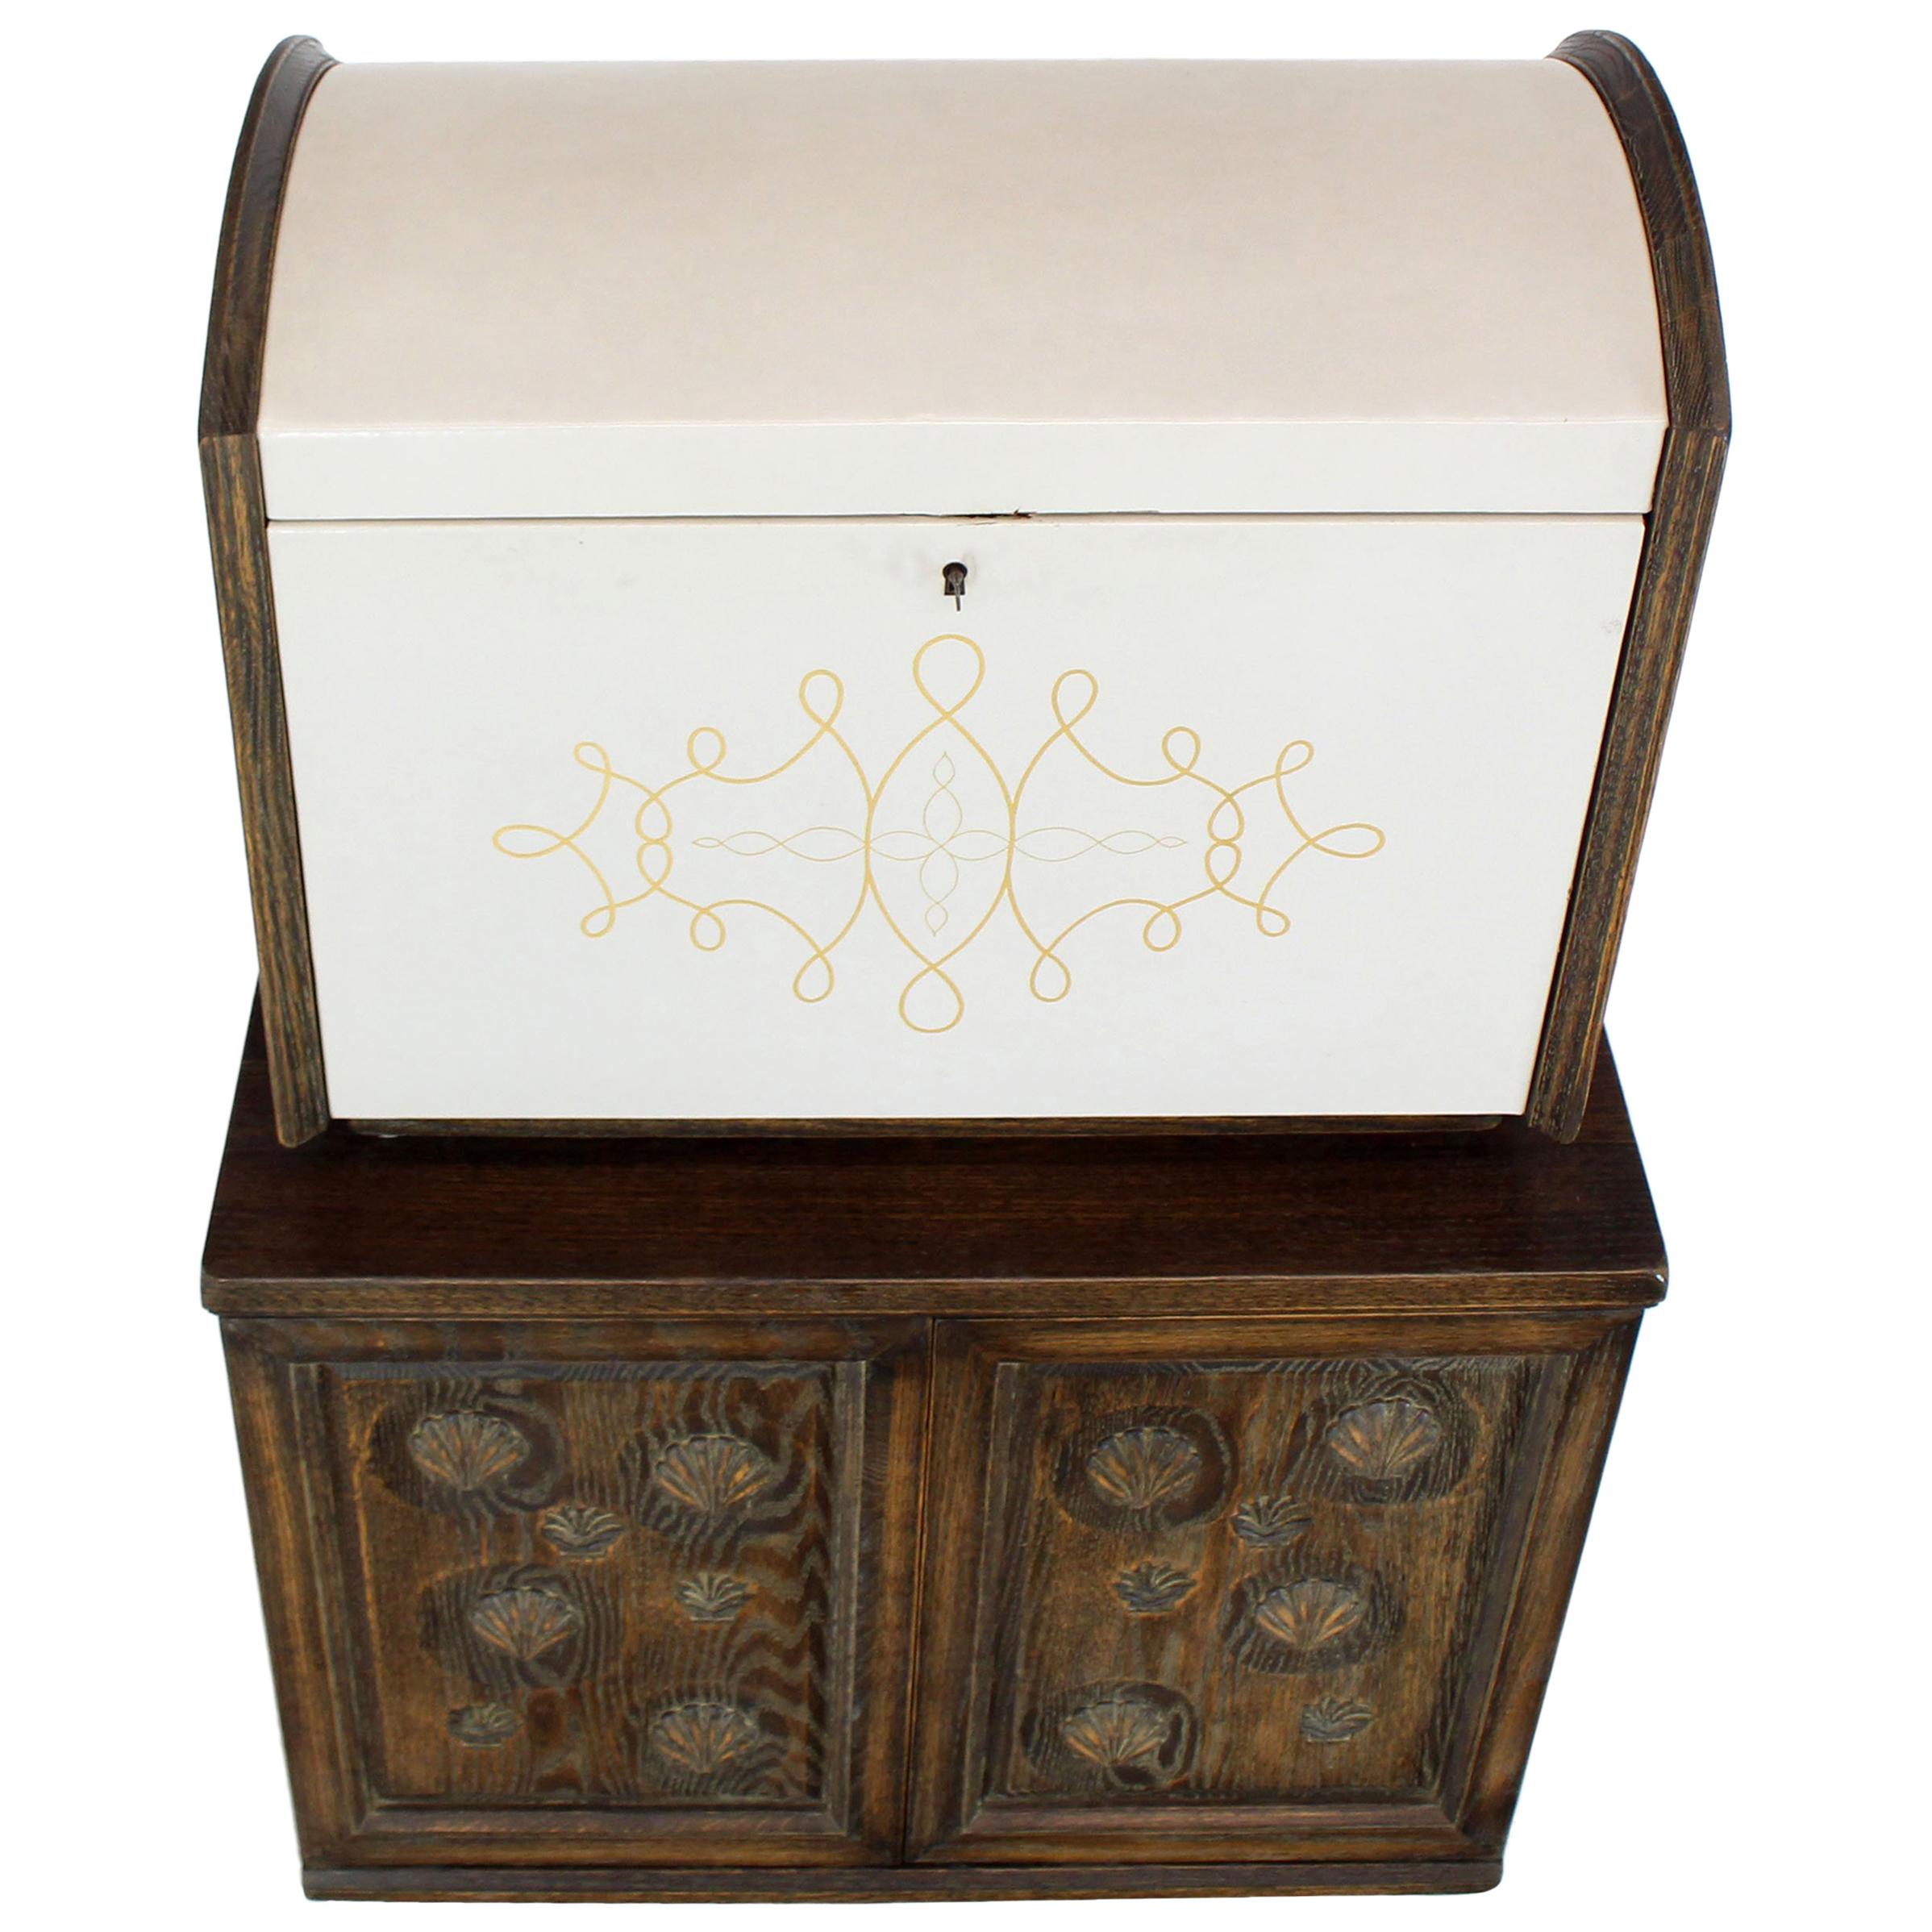 Tooled off white leather wrapped Campaign style transportable trunk shape secretary desk with matching bachelor chest. Two part cabinet. All heavy deeply carved solid oak cerused finish design. Solid brass hardware. Style of James Mont Jean Michel